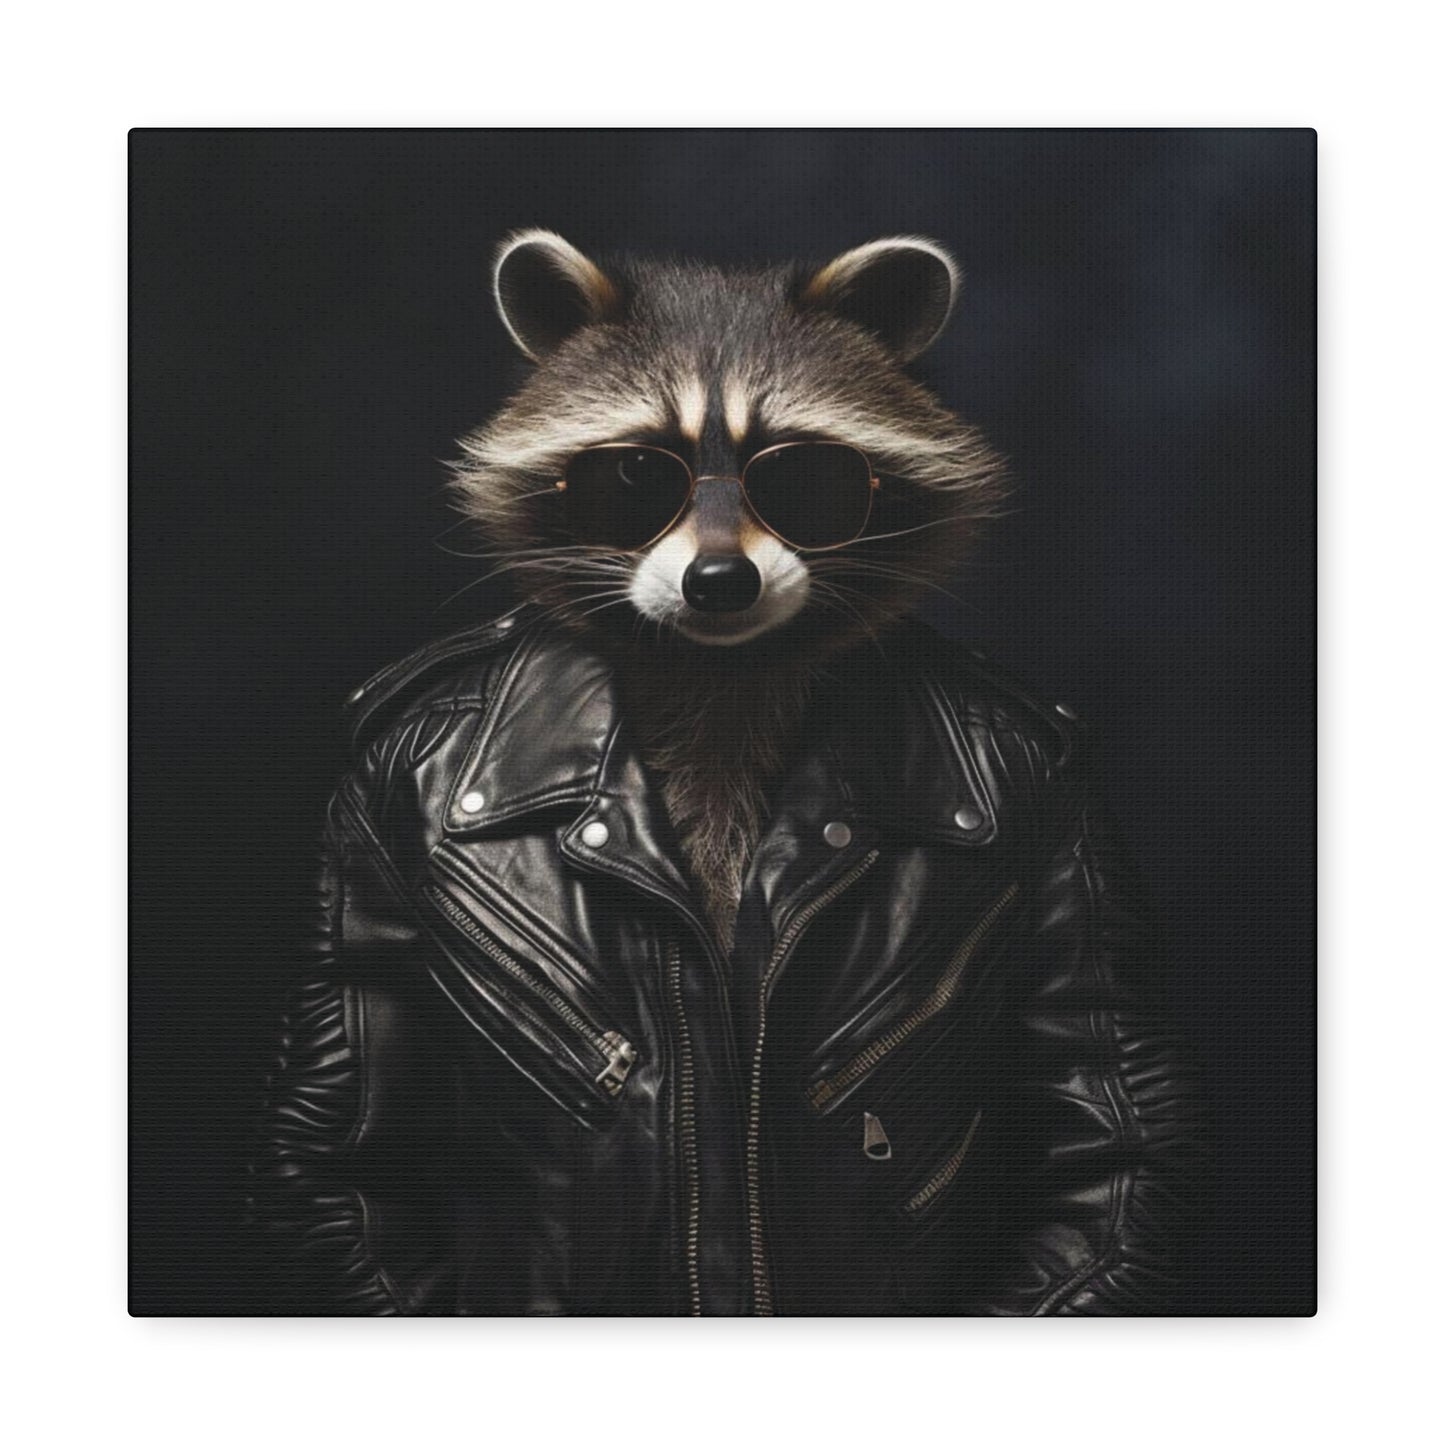 Raccon Leather | Canvas Gallery Wrap | Wall Art